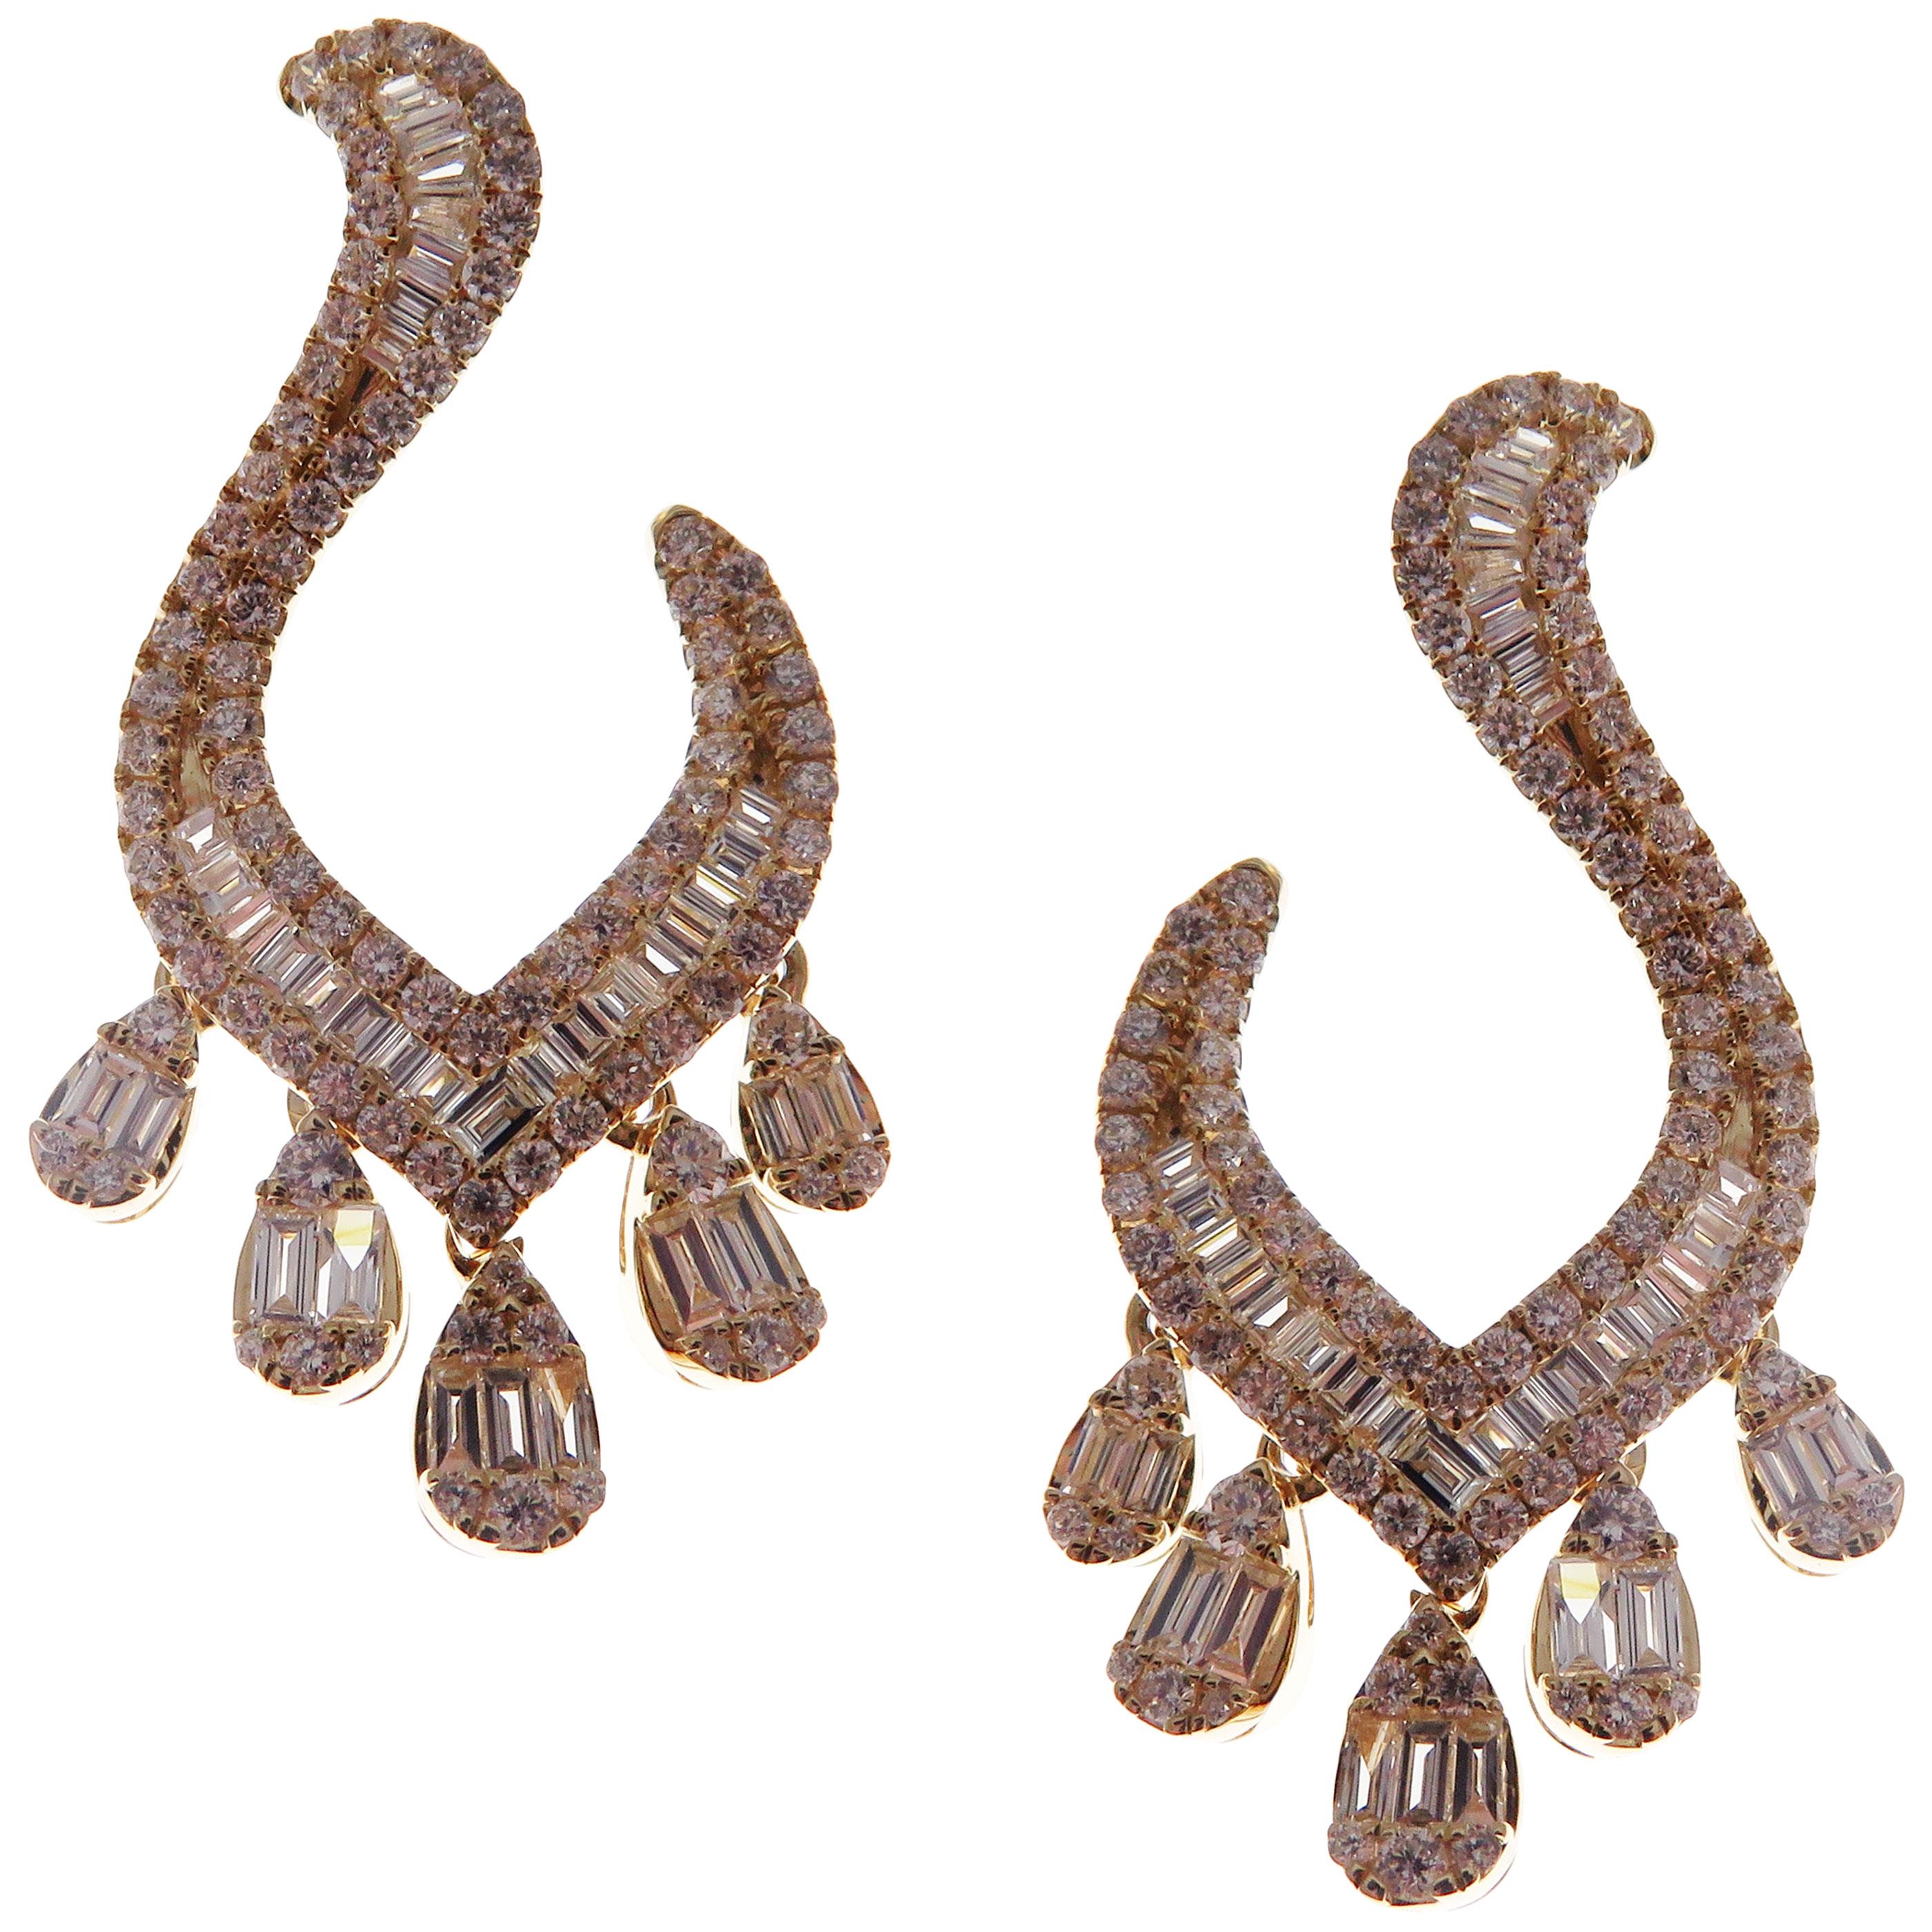 These trendy tassel twisty earrings with white baguette diamonds are crafted in 18-karat yellow gold, featuring 174 round white diamonds totaling of 1.17 carats and 71 baguette white diamonds totaling of 0.89 carats.
These earrings come with push